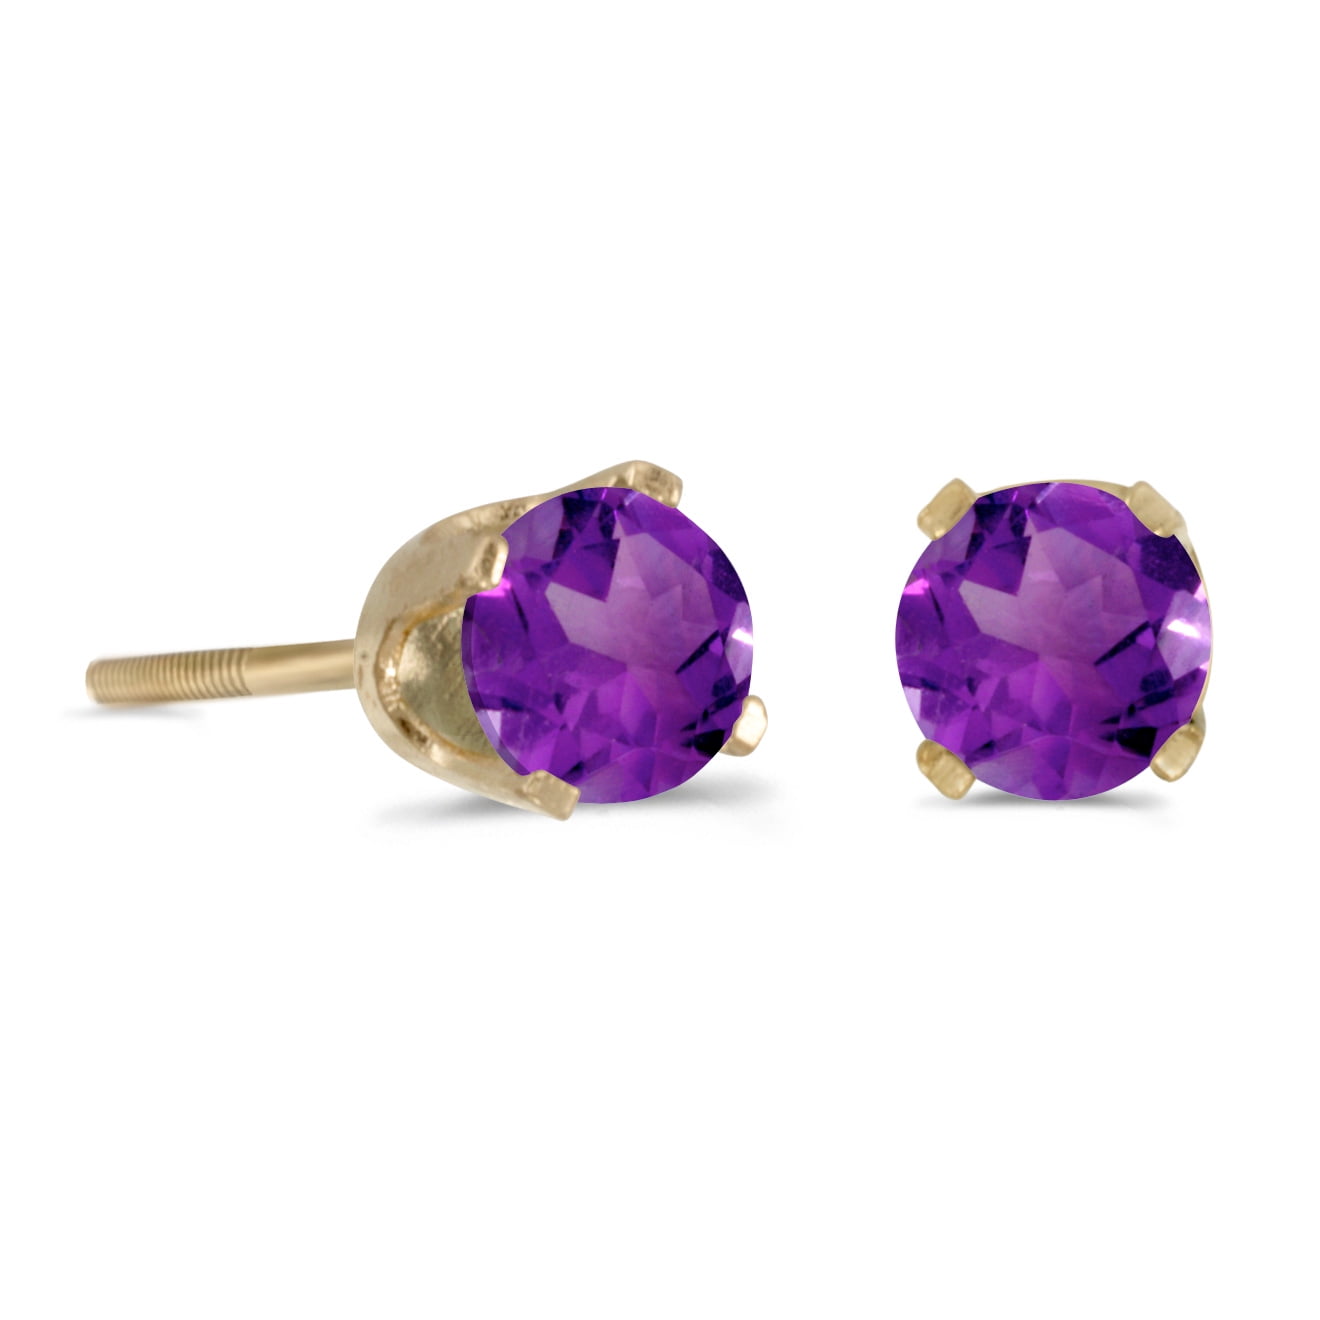 14k Yellow Gold 3mm Round Simulated Amethyst Stud Earrings 